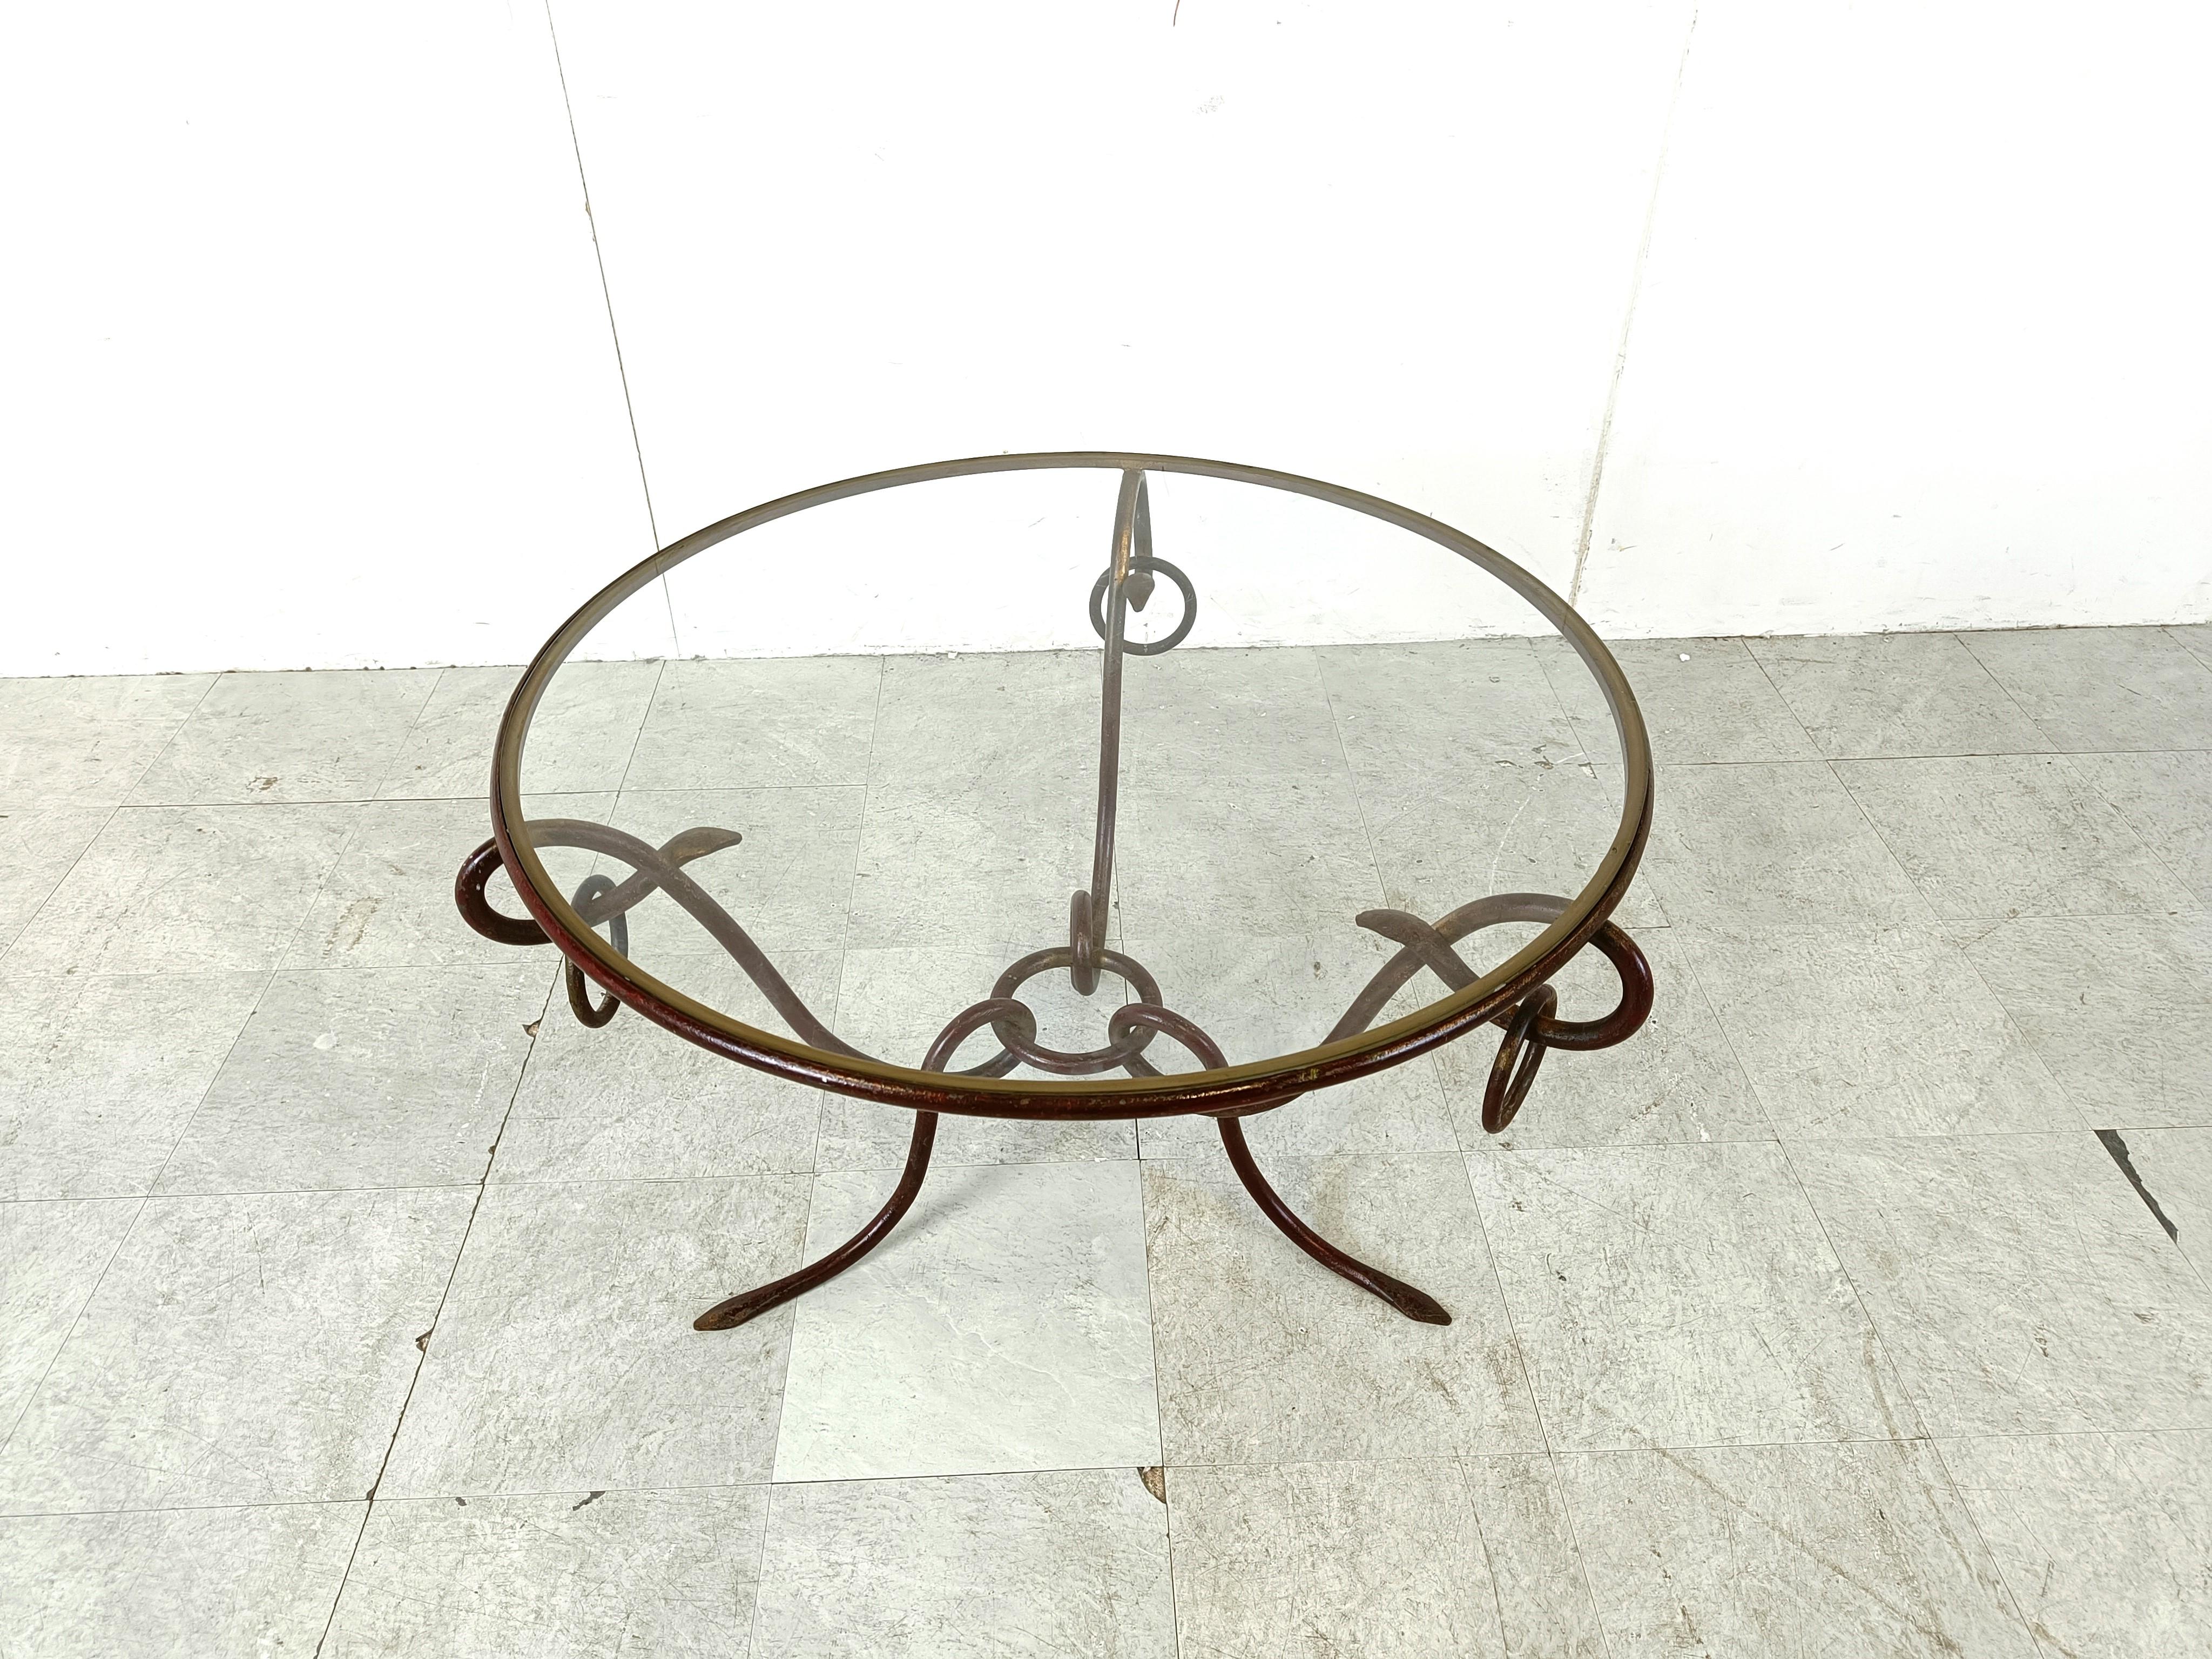 Vintage coffee table designed by René Drouet (1899–1993).

The table has a wrought iron base and a clear glass top. 

Wonderful craftsmanship.

1940s - France

Dimensions:
Height: 55cm/21.65